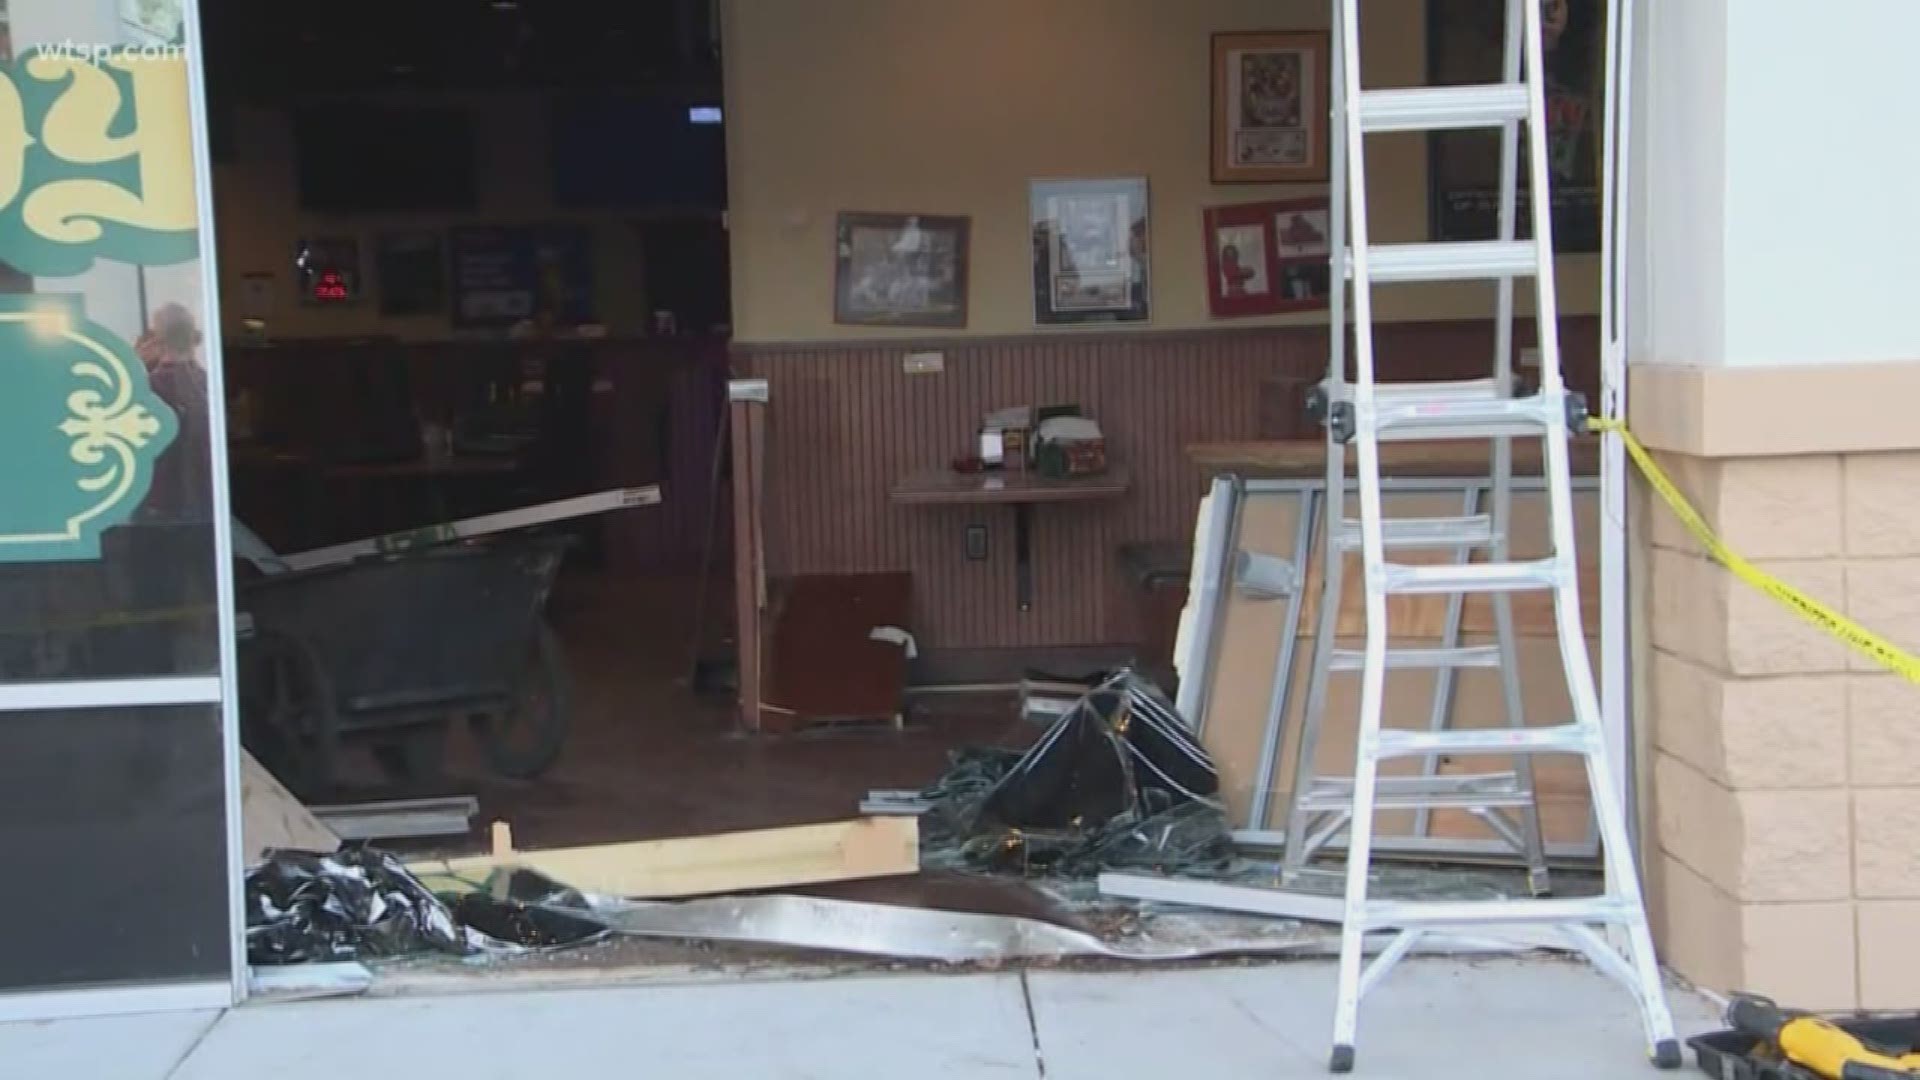 Six people, including the driver, have been rushed to area hospitals after a car crashed Tuesday afternoon into a Spring Hill restaurant.